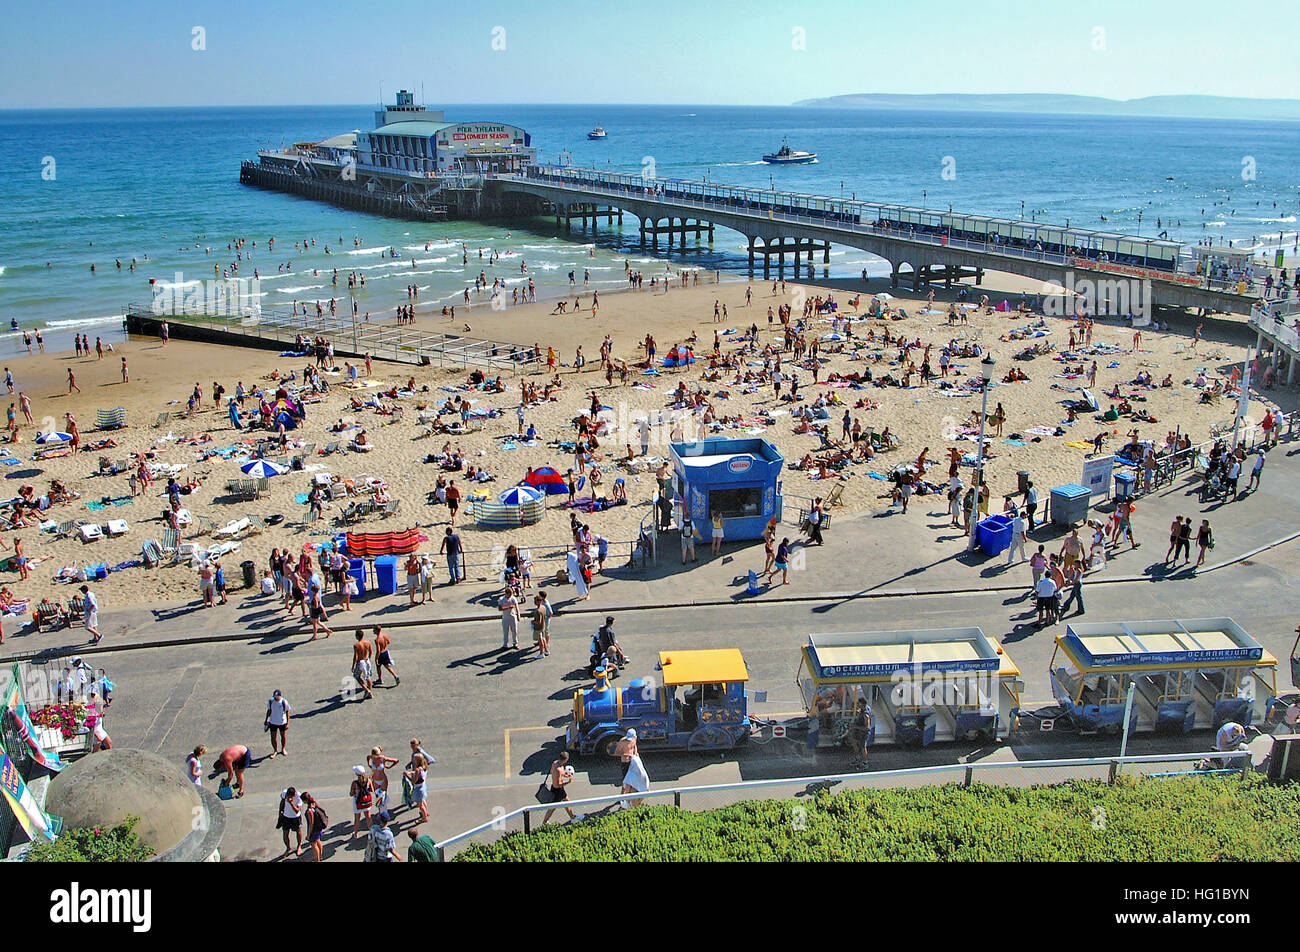 High view of Bournemouth's promenade, land train, seafront, and pier in the background. Stock Photo